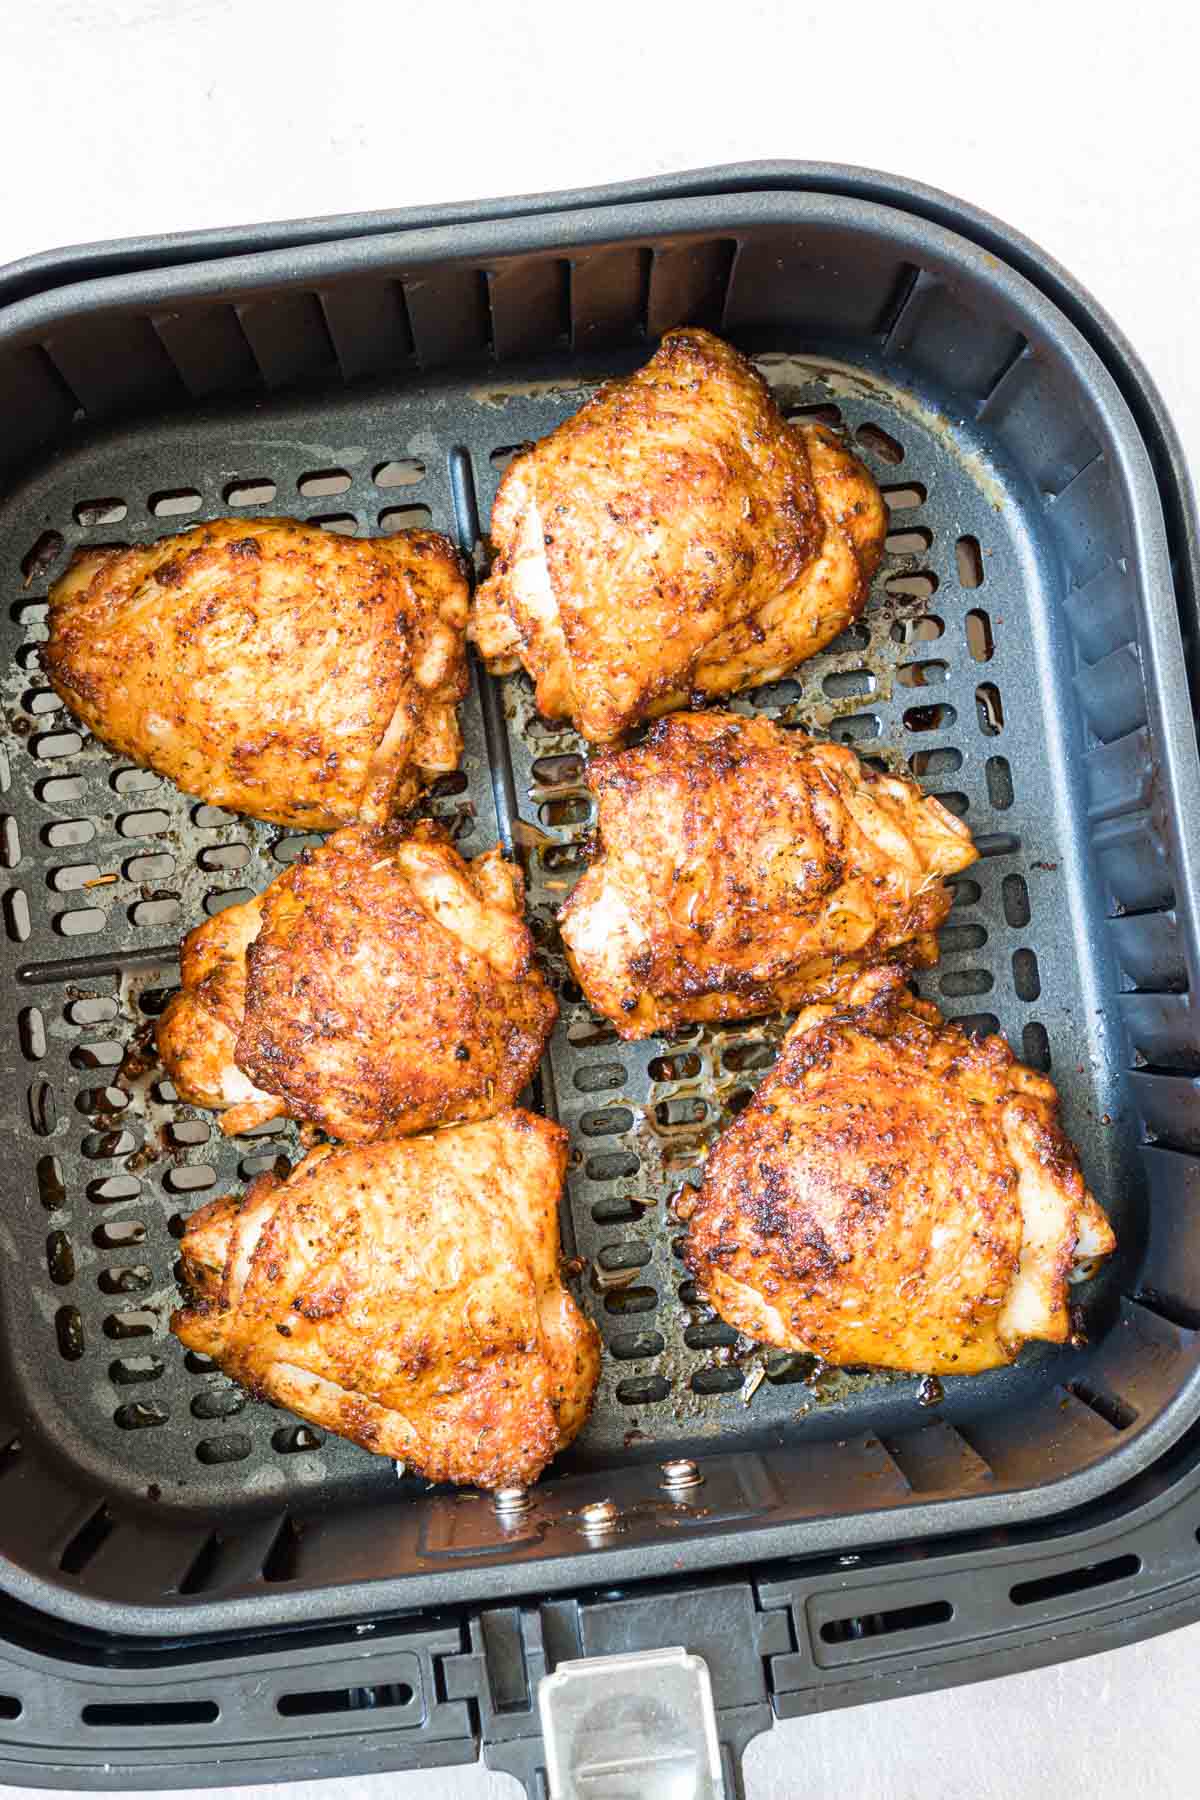 the finished air fryer chicken thighs in the air fryer basket